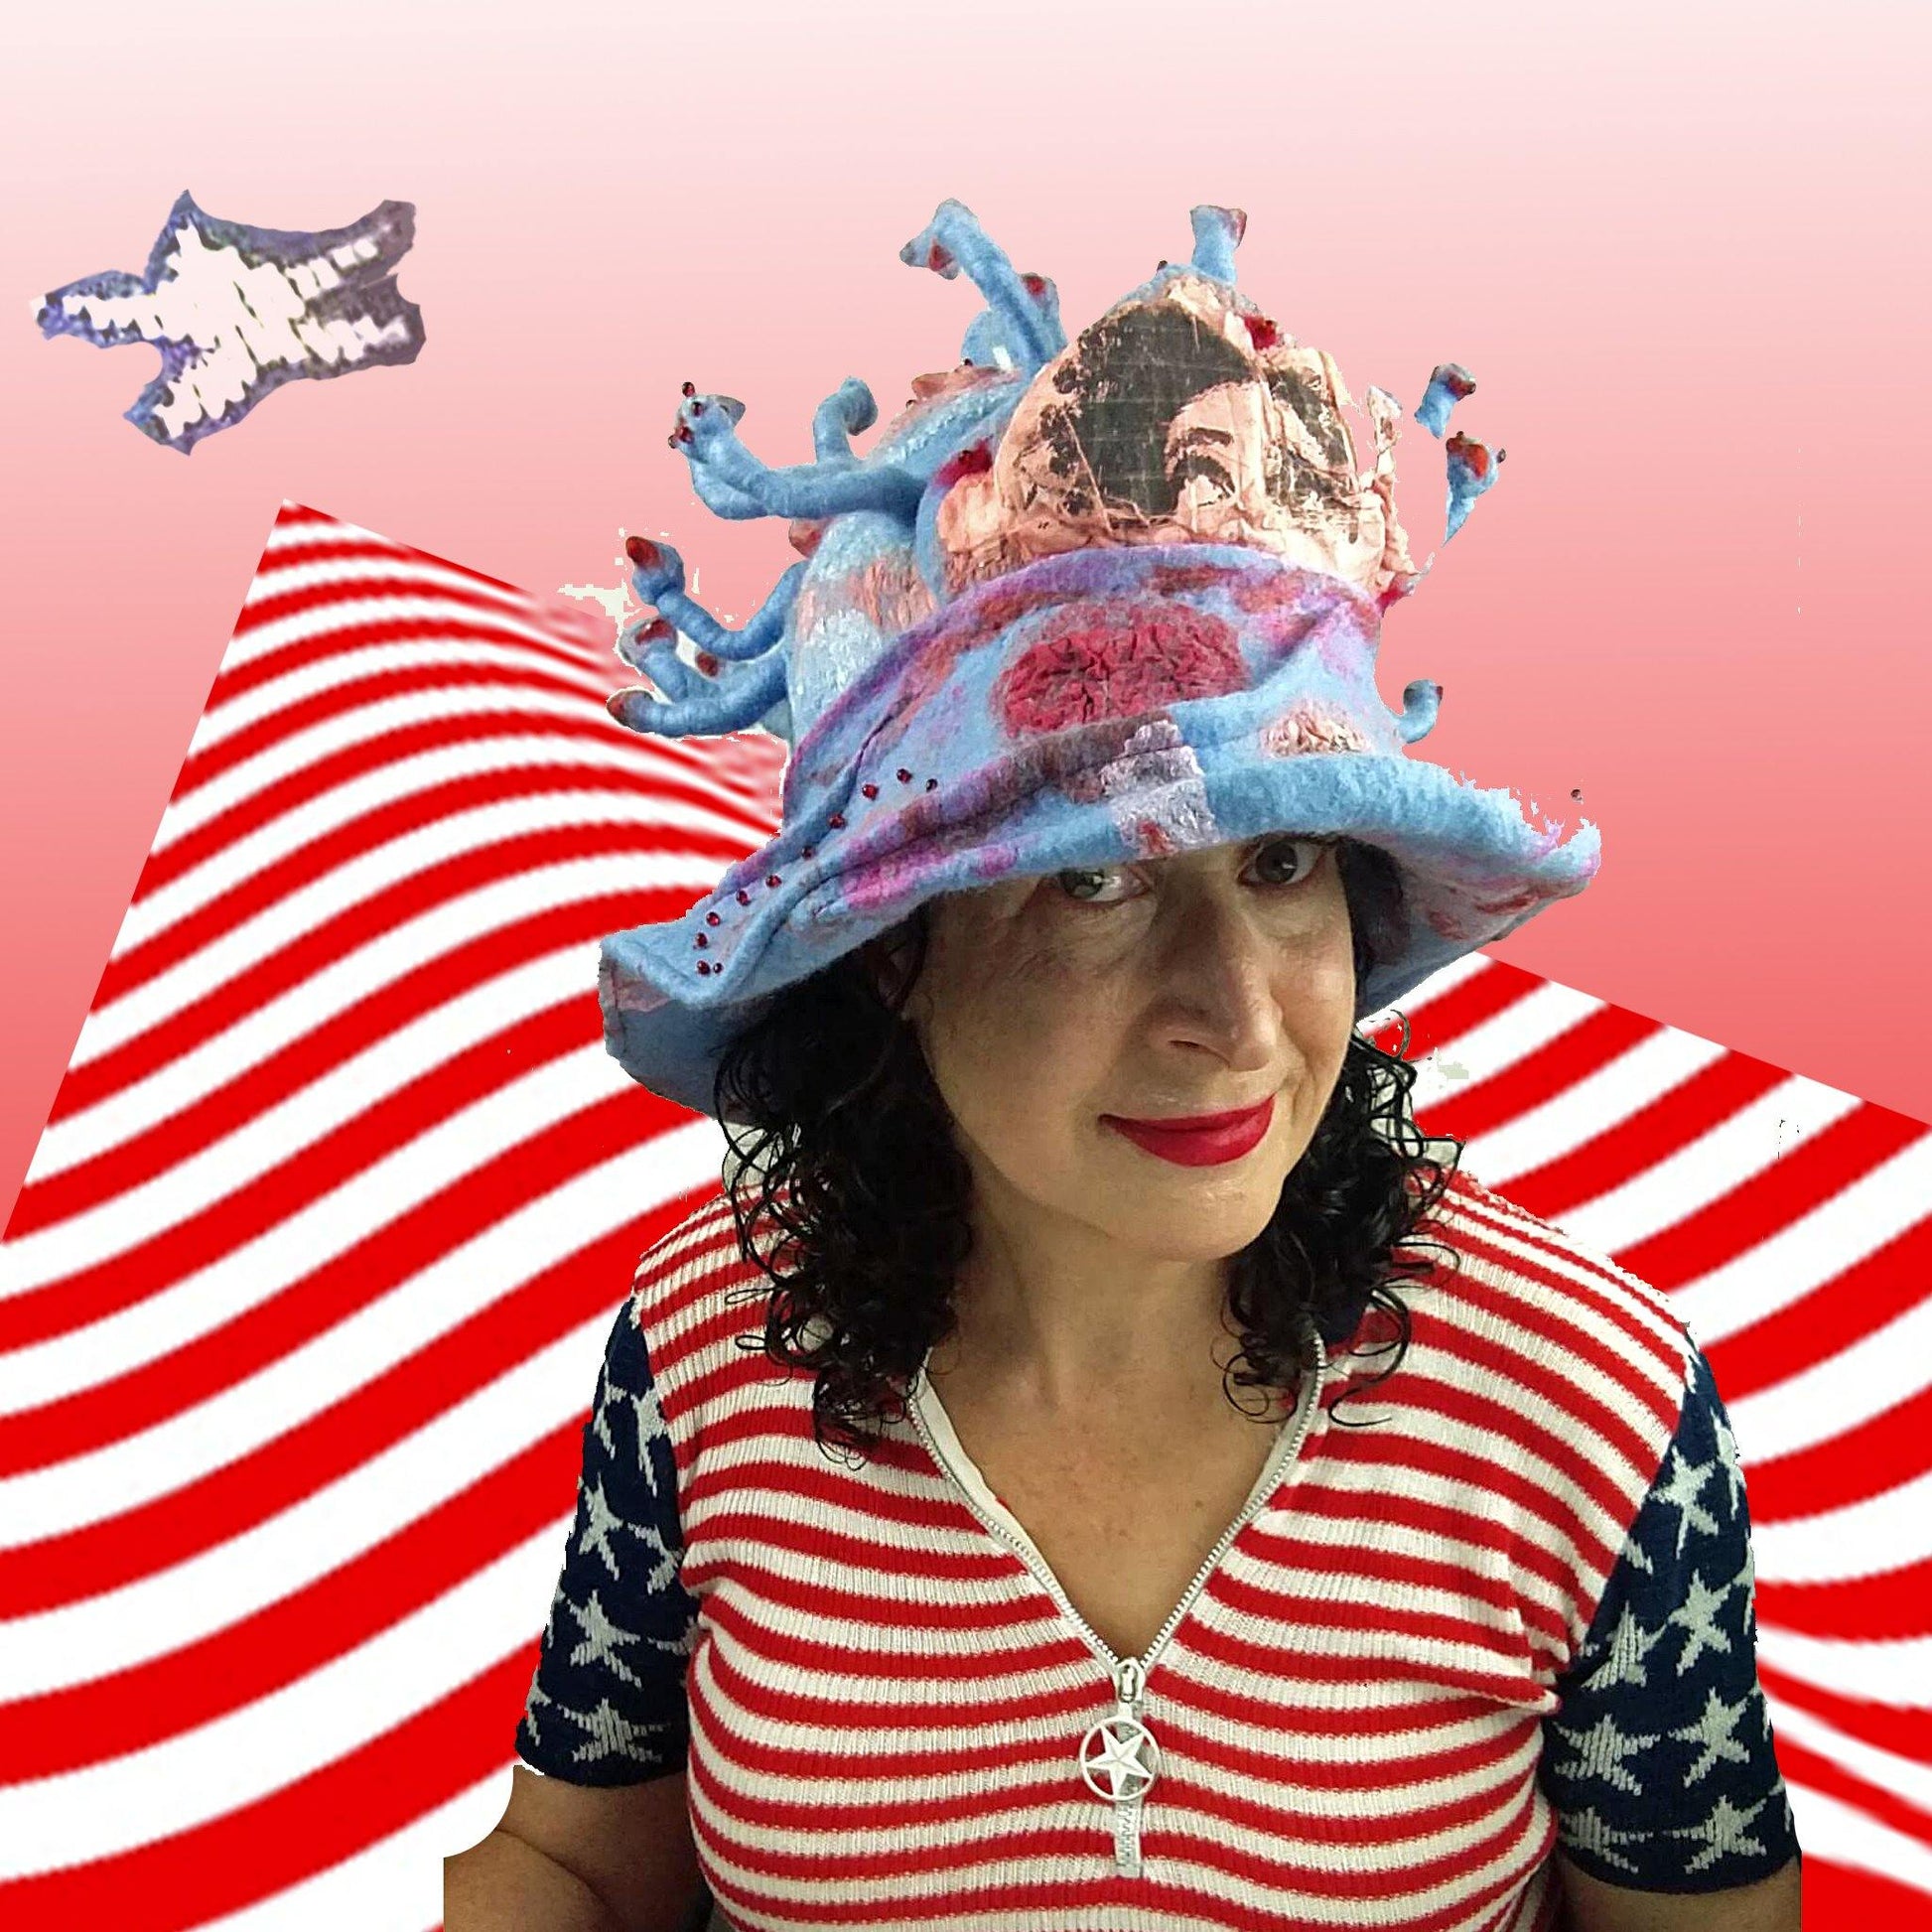 Pale Blue and Pink Hat inspired by Coronavirus with Eyes on it, worn by woman in USA flag inspired shirt.